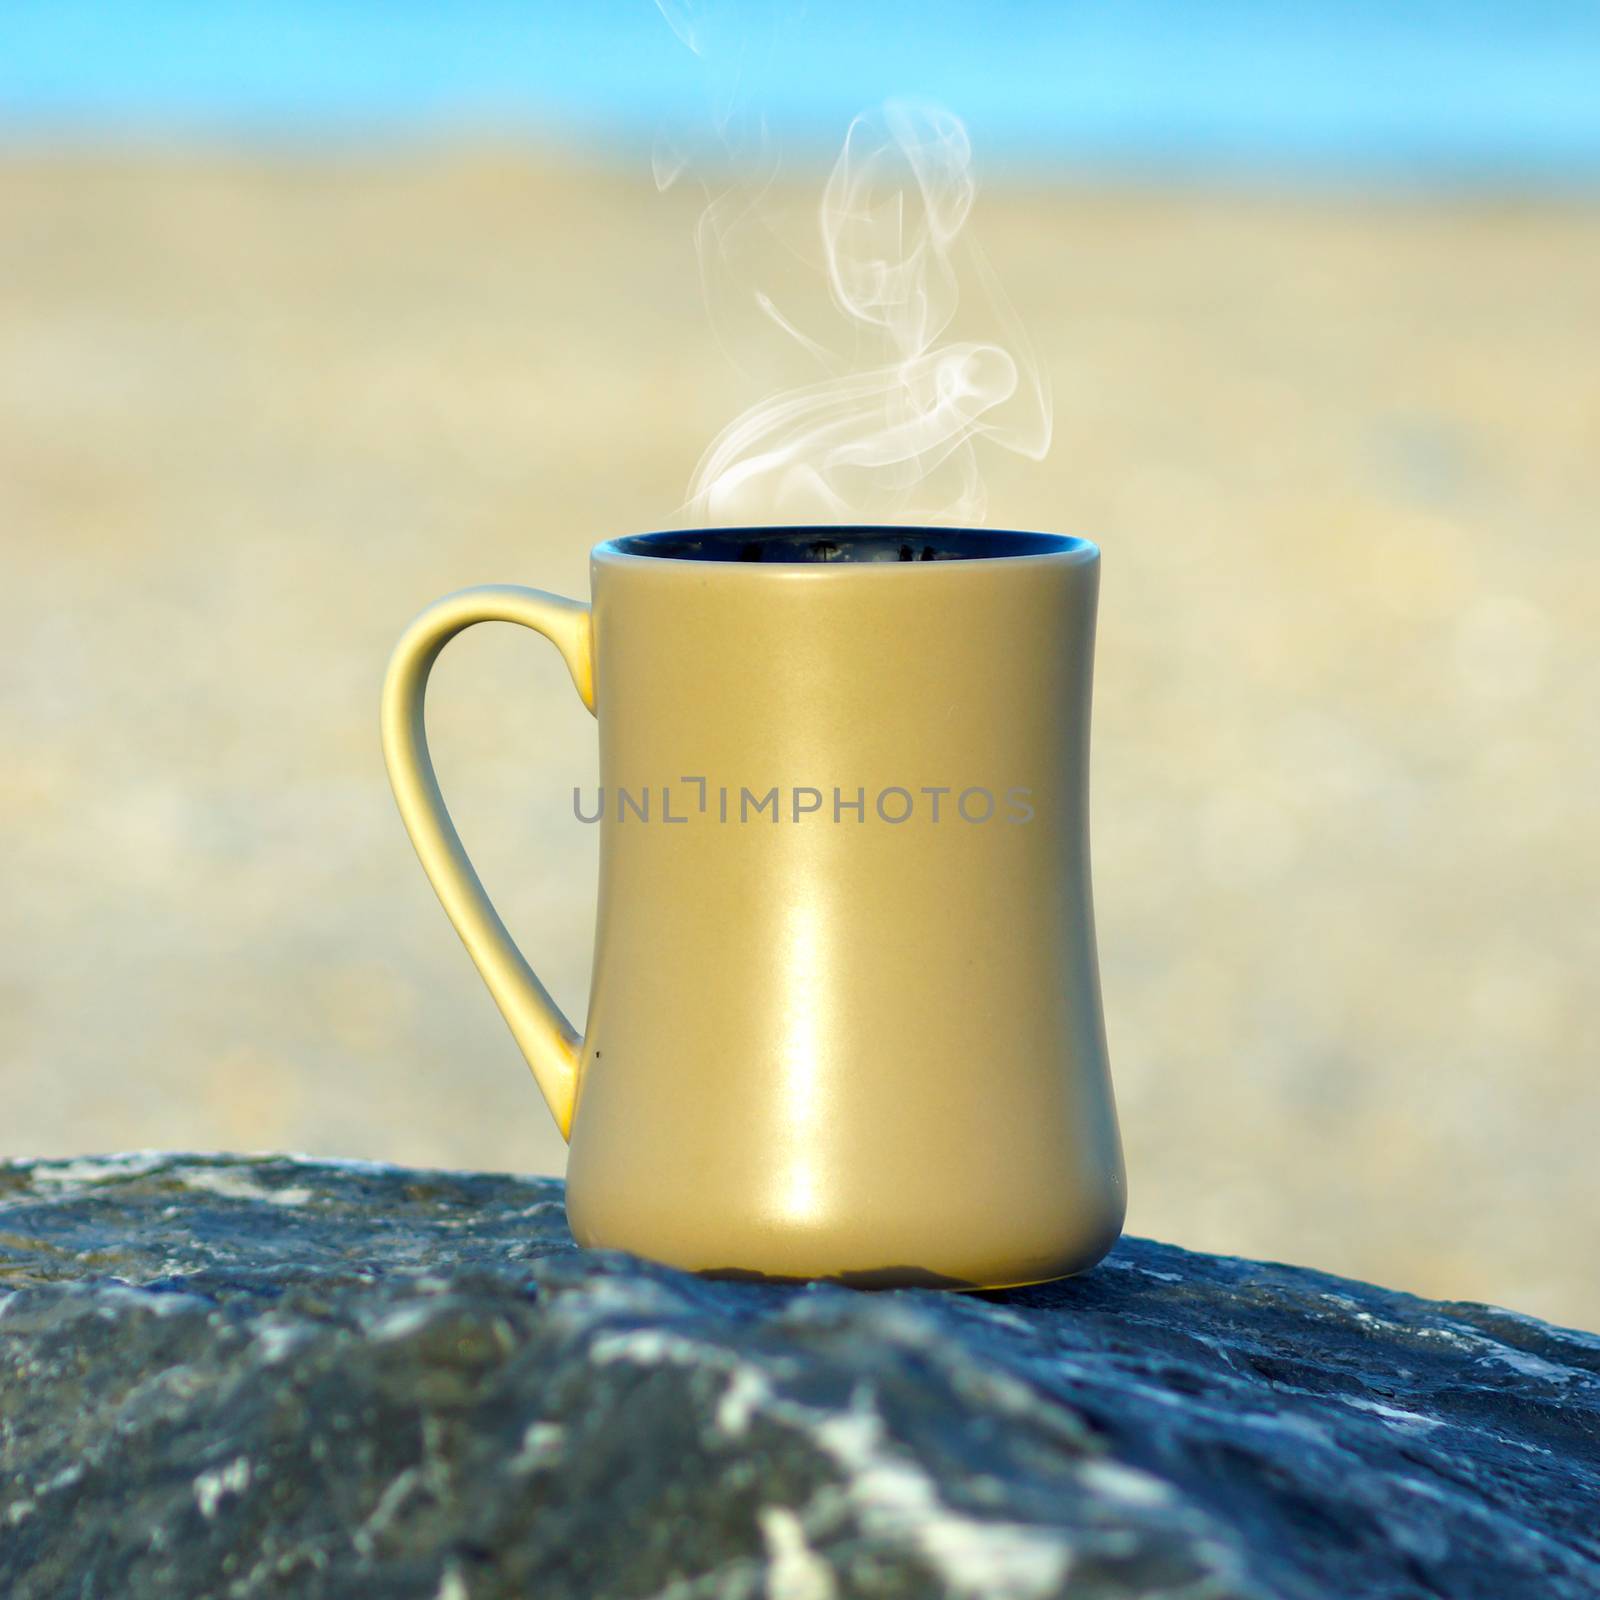 Coffee at the beach in the morning light and sunrise.